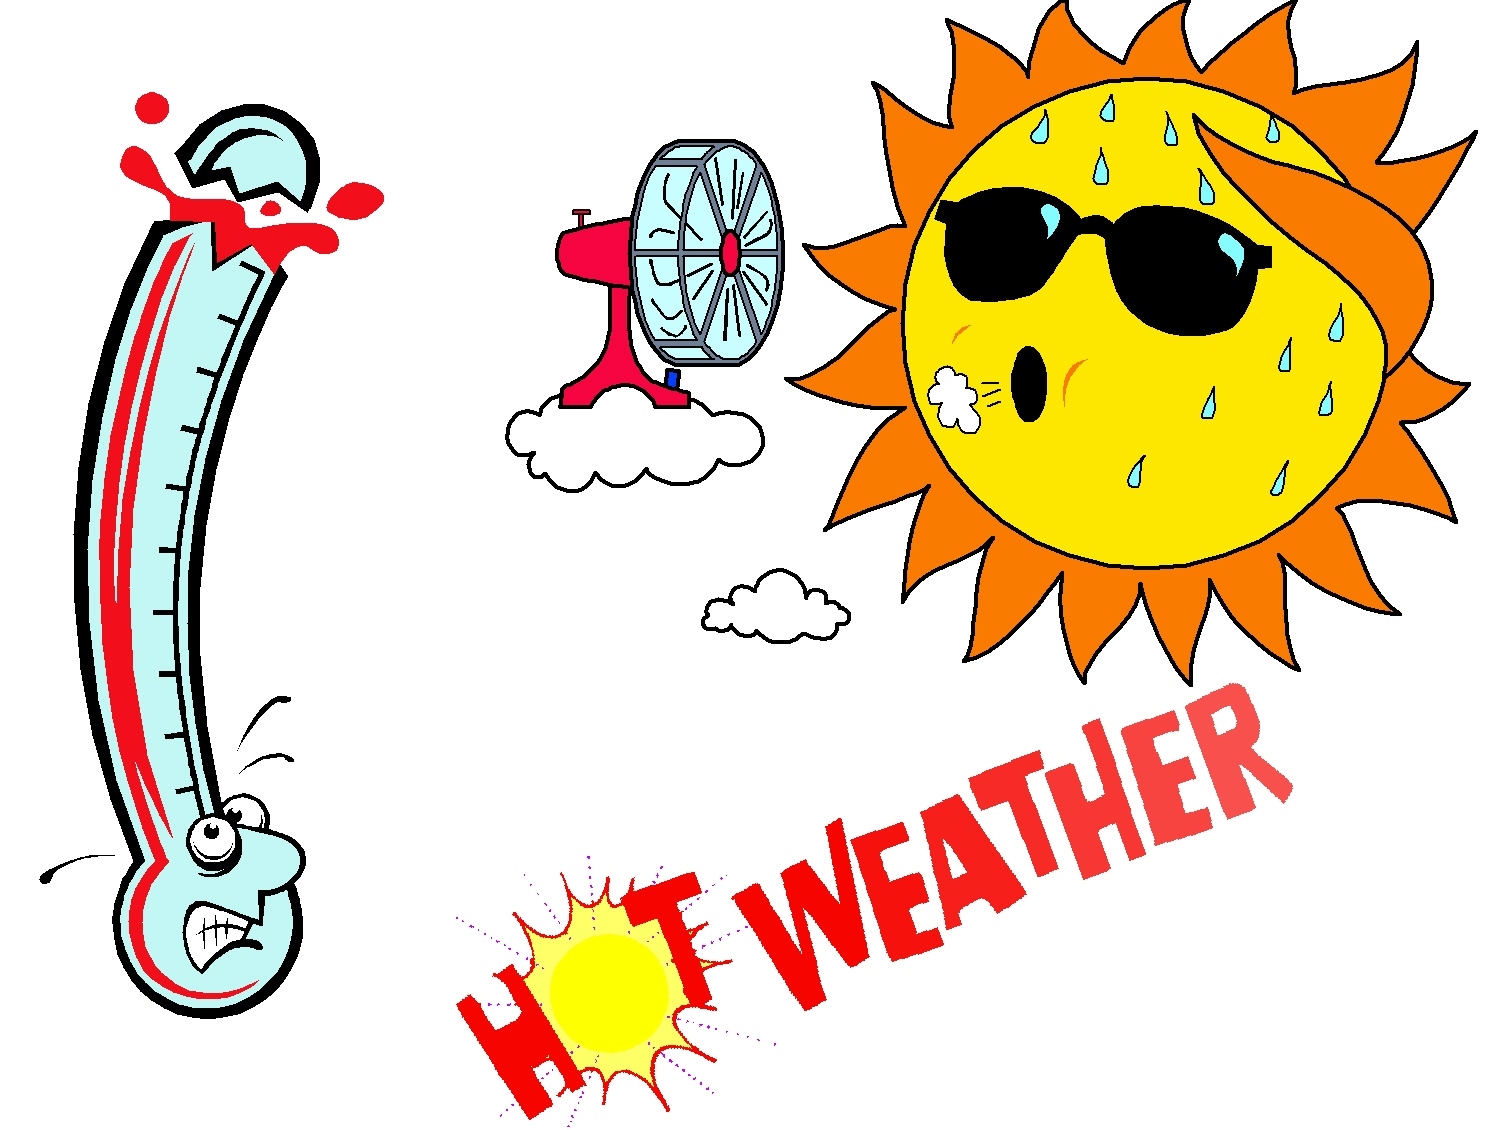 CC BY NC ND 4.0 image/jpeg Resolution: 1505x1130, File size: 360Kb, Hot Weather Clip Art drawing